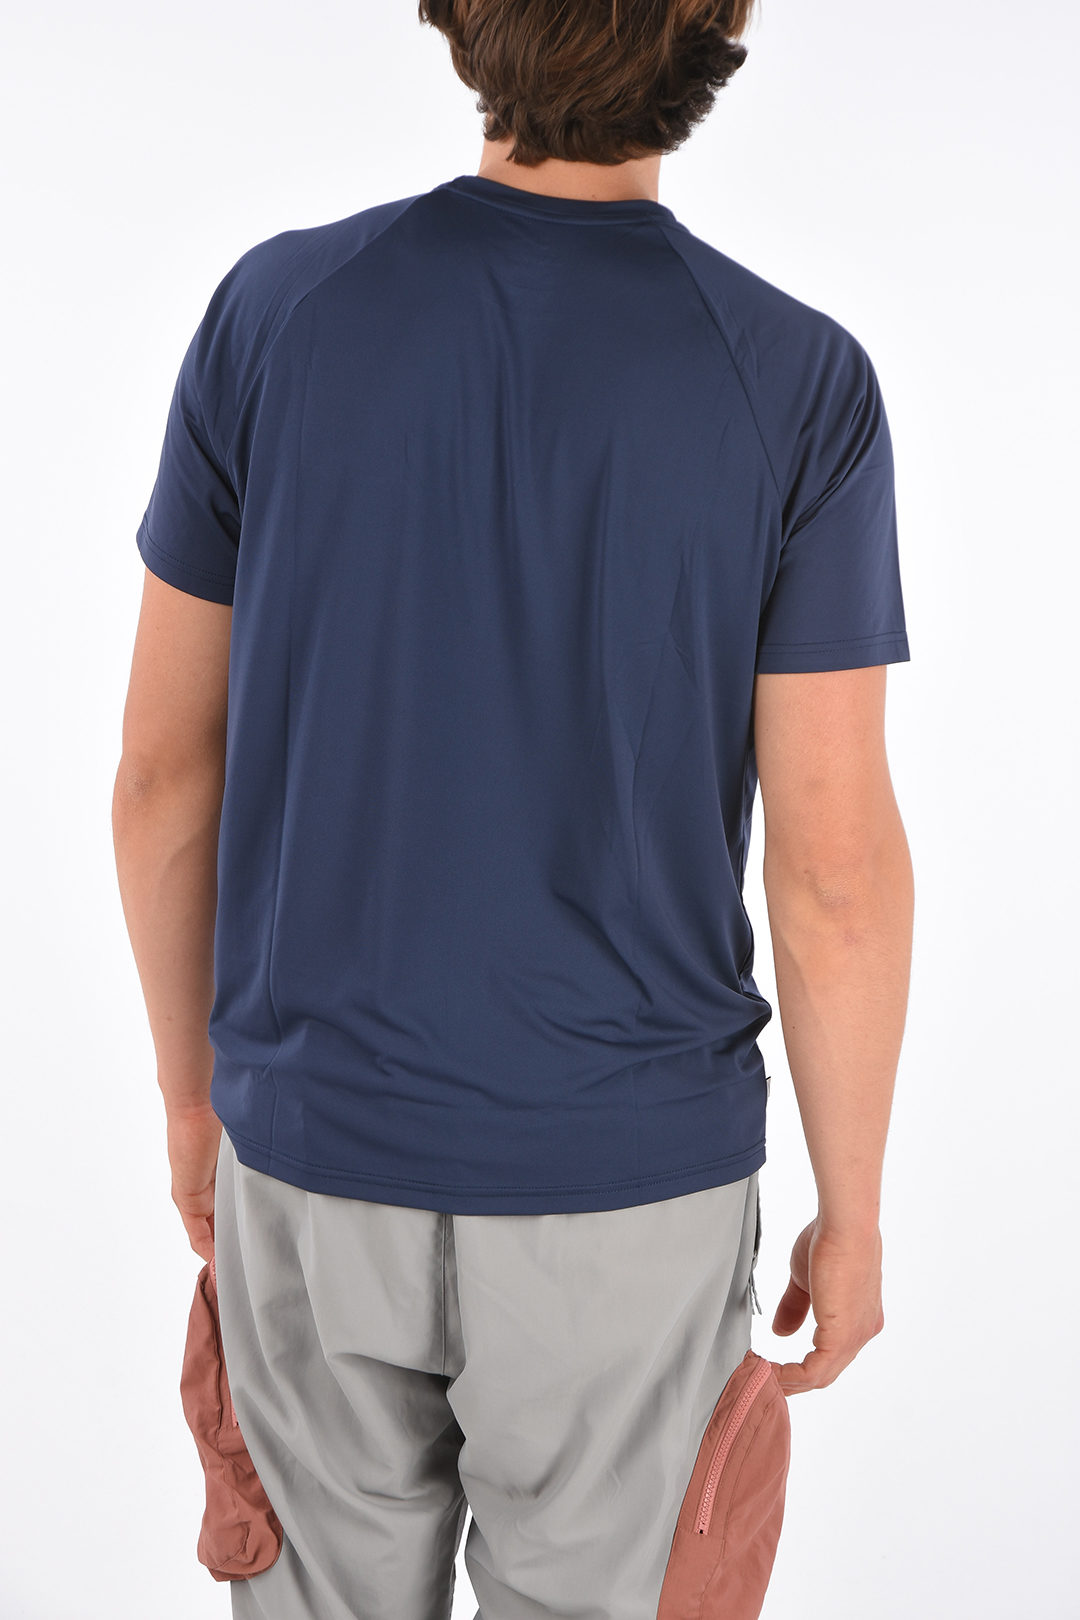 Nike T-shirt with Breast Pocket men - Glamood Outlet